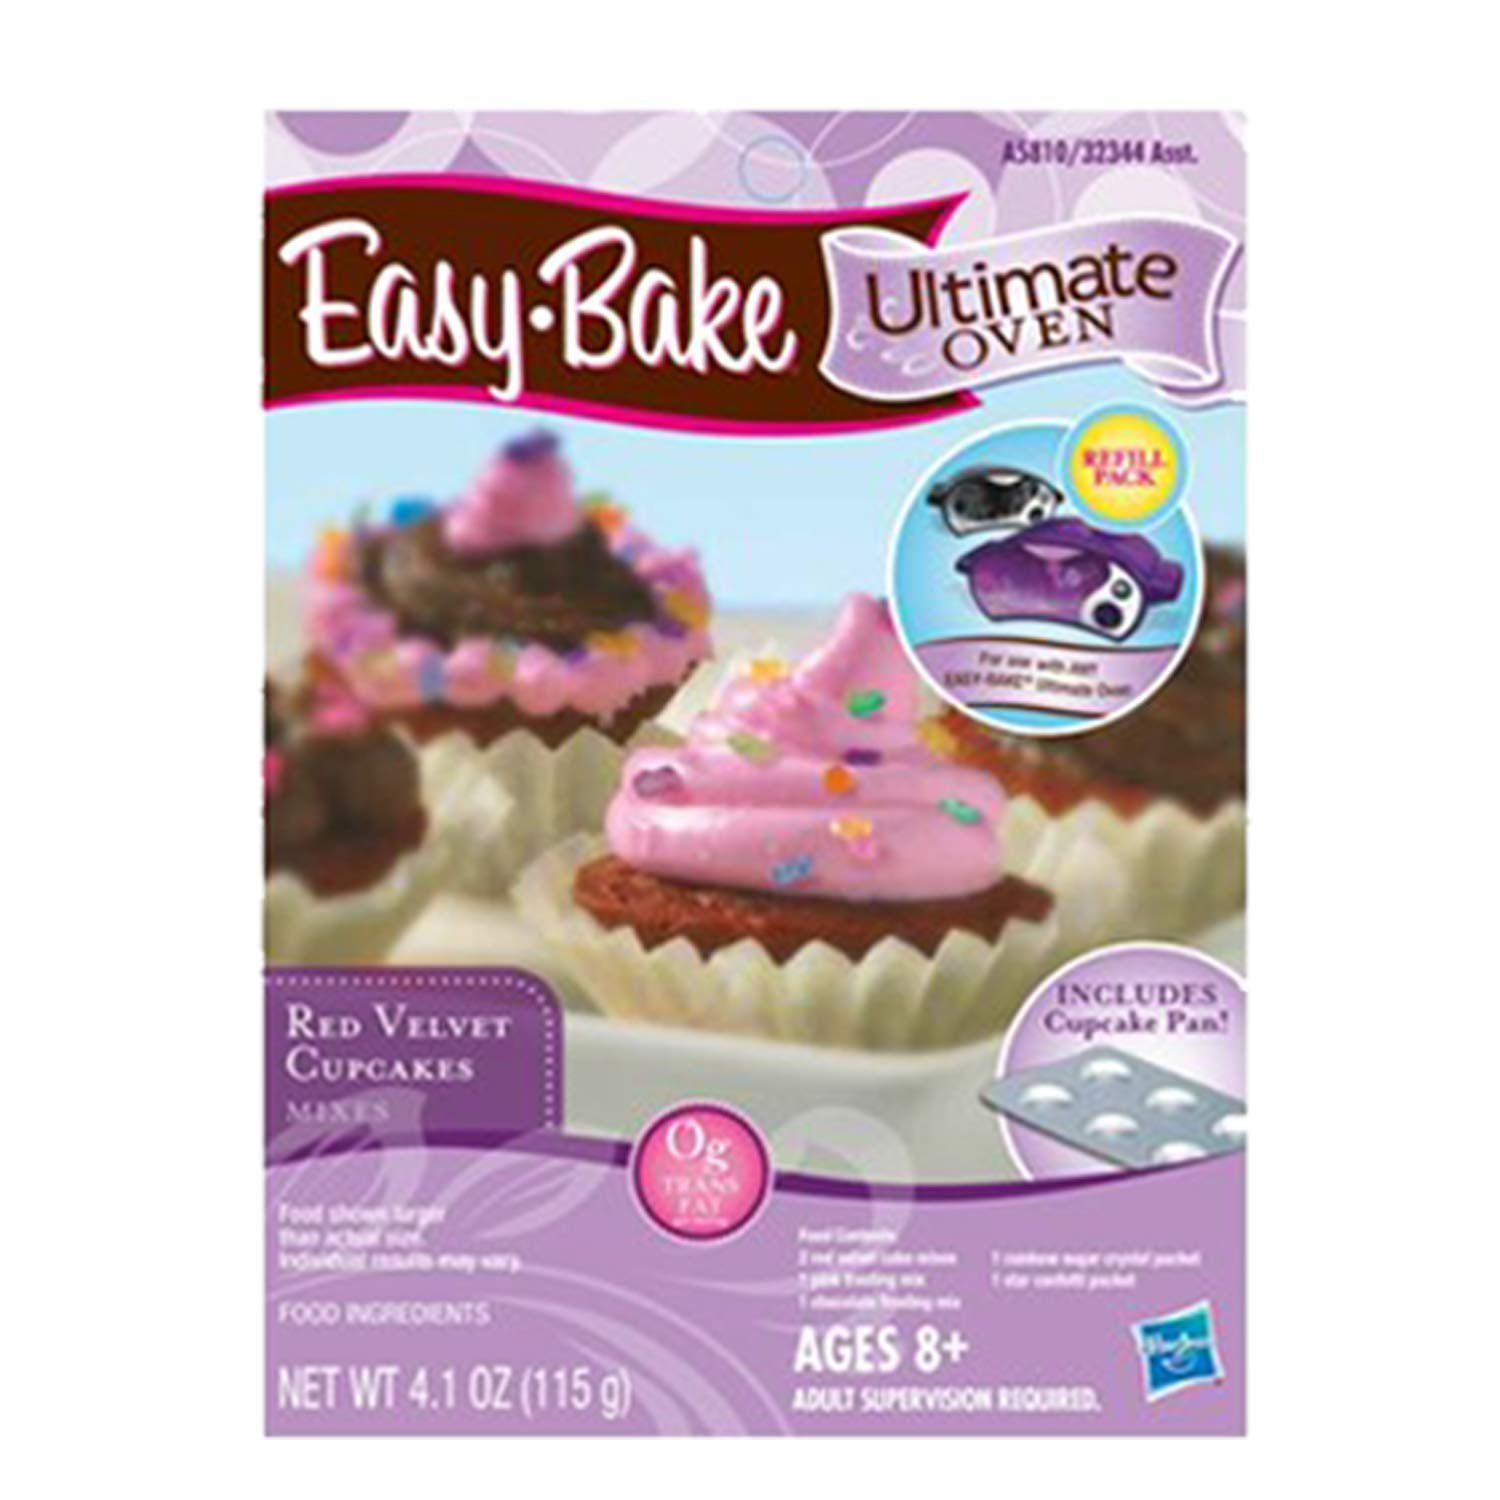 Kids' Oven Pan Set Compatible with Easy Bake Ultimate Oven | Accessories  for Cooking Easy Bake Oven Mixes | Includes Cupcake Pan, Rectangular Bake  Pan